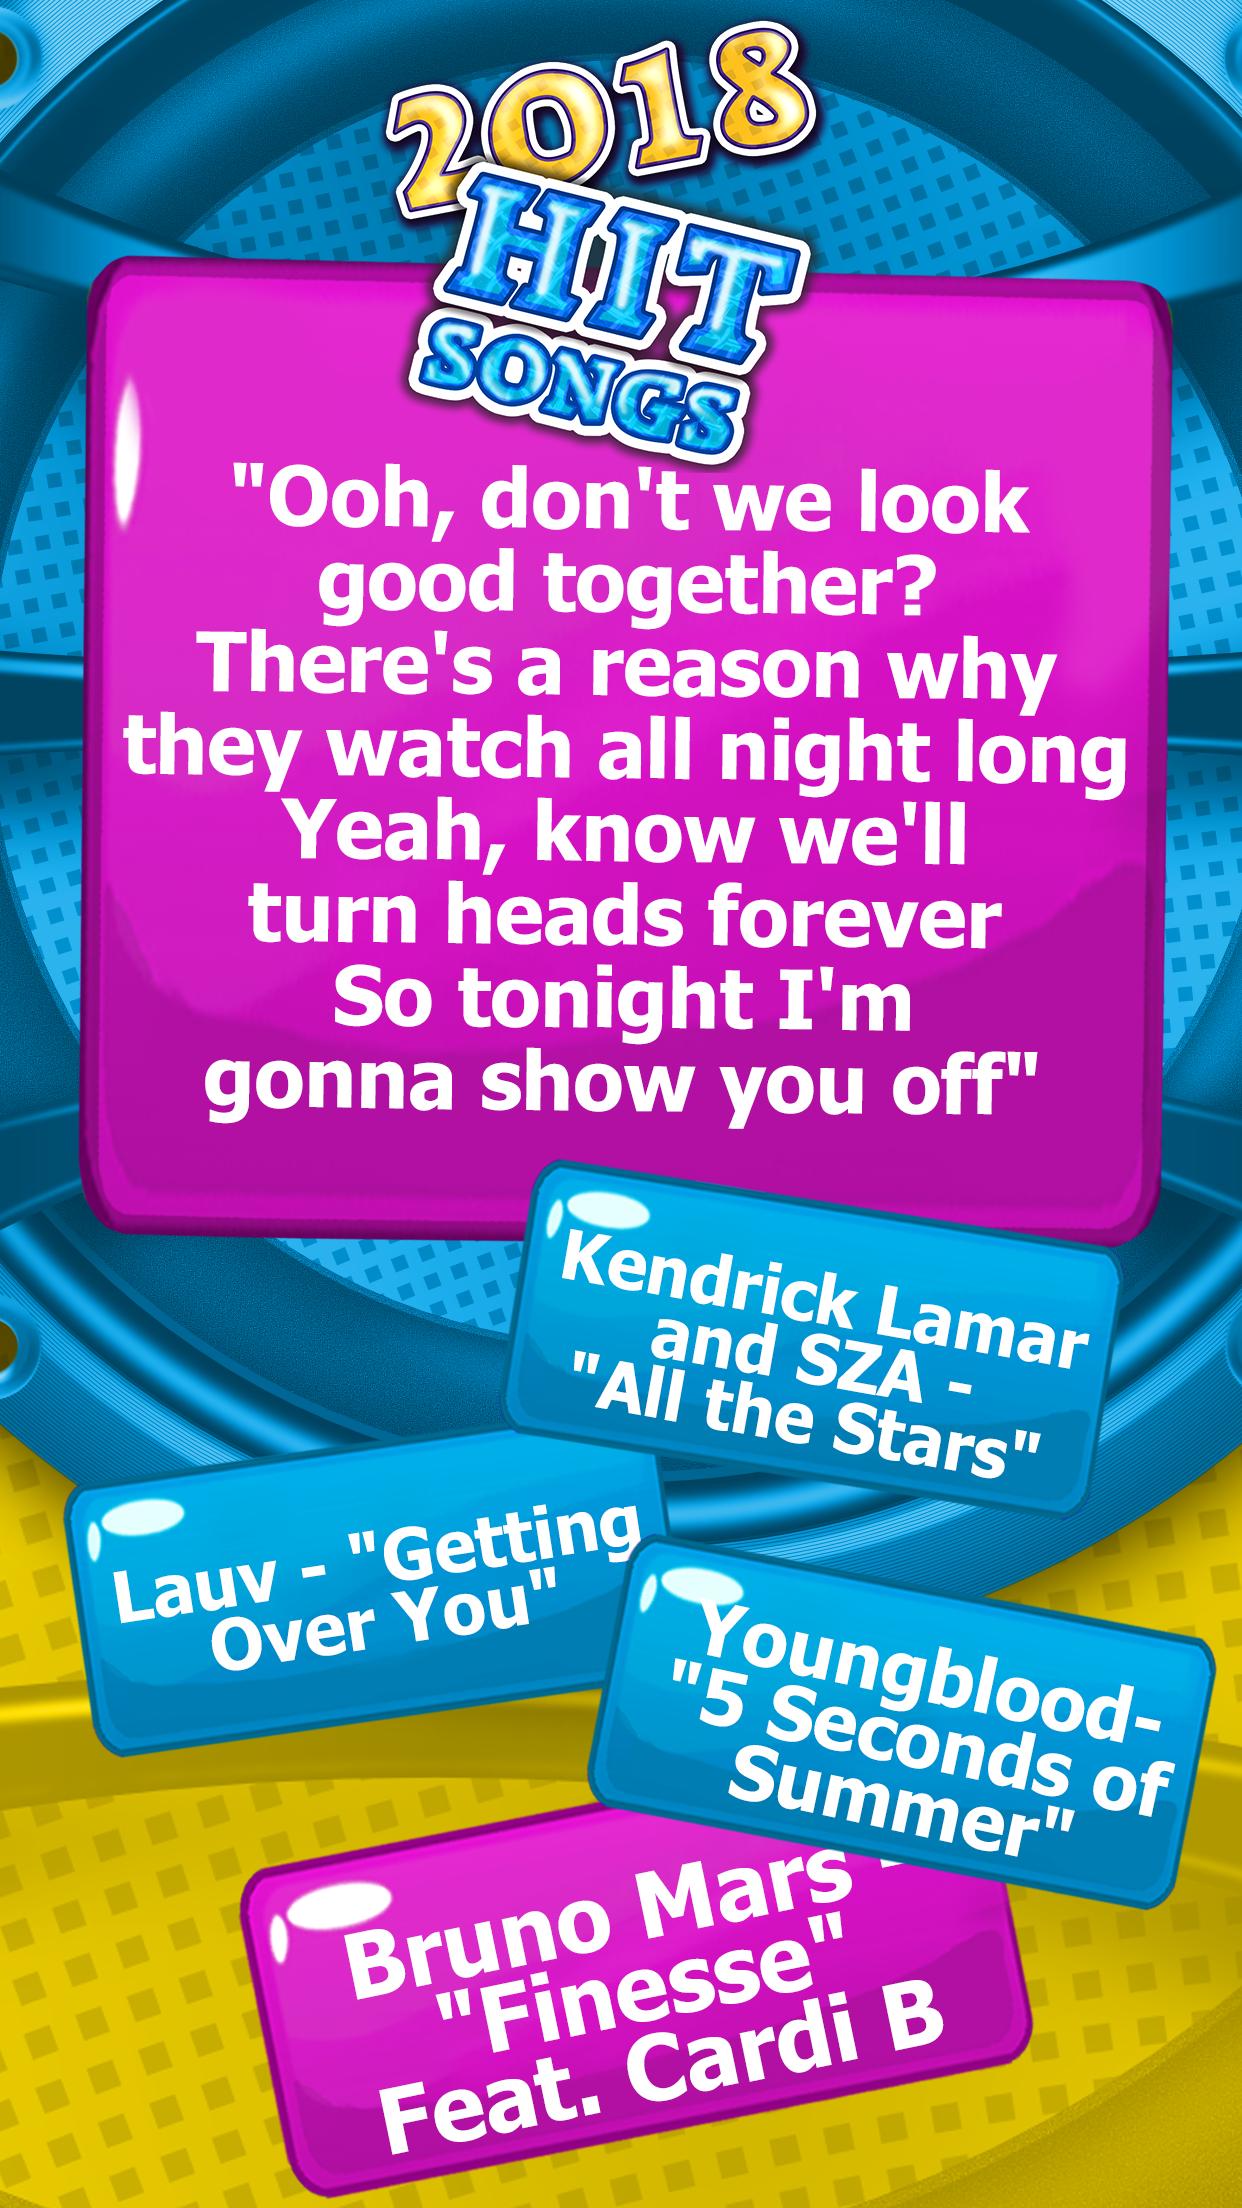 Guess The Song Lyrics Quiz 2018 for Android - APK Download